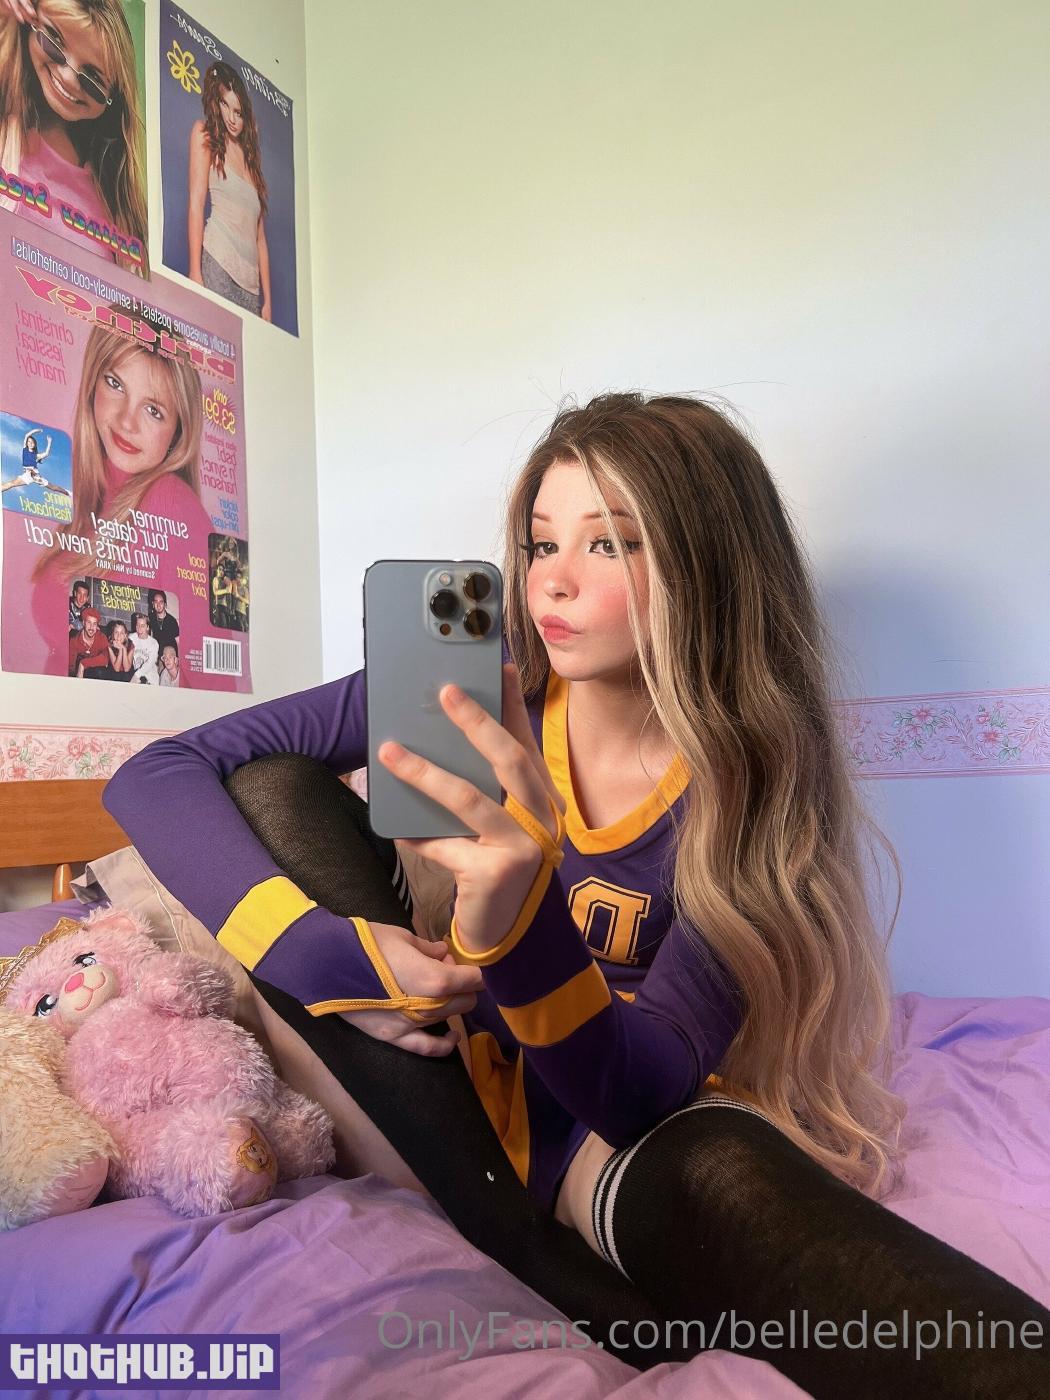 1664337351 492 Belle Delphine Cheerleader Outfit Onlyfans Set Leaked